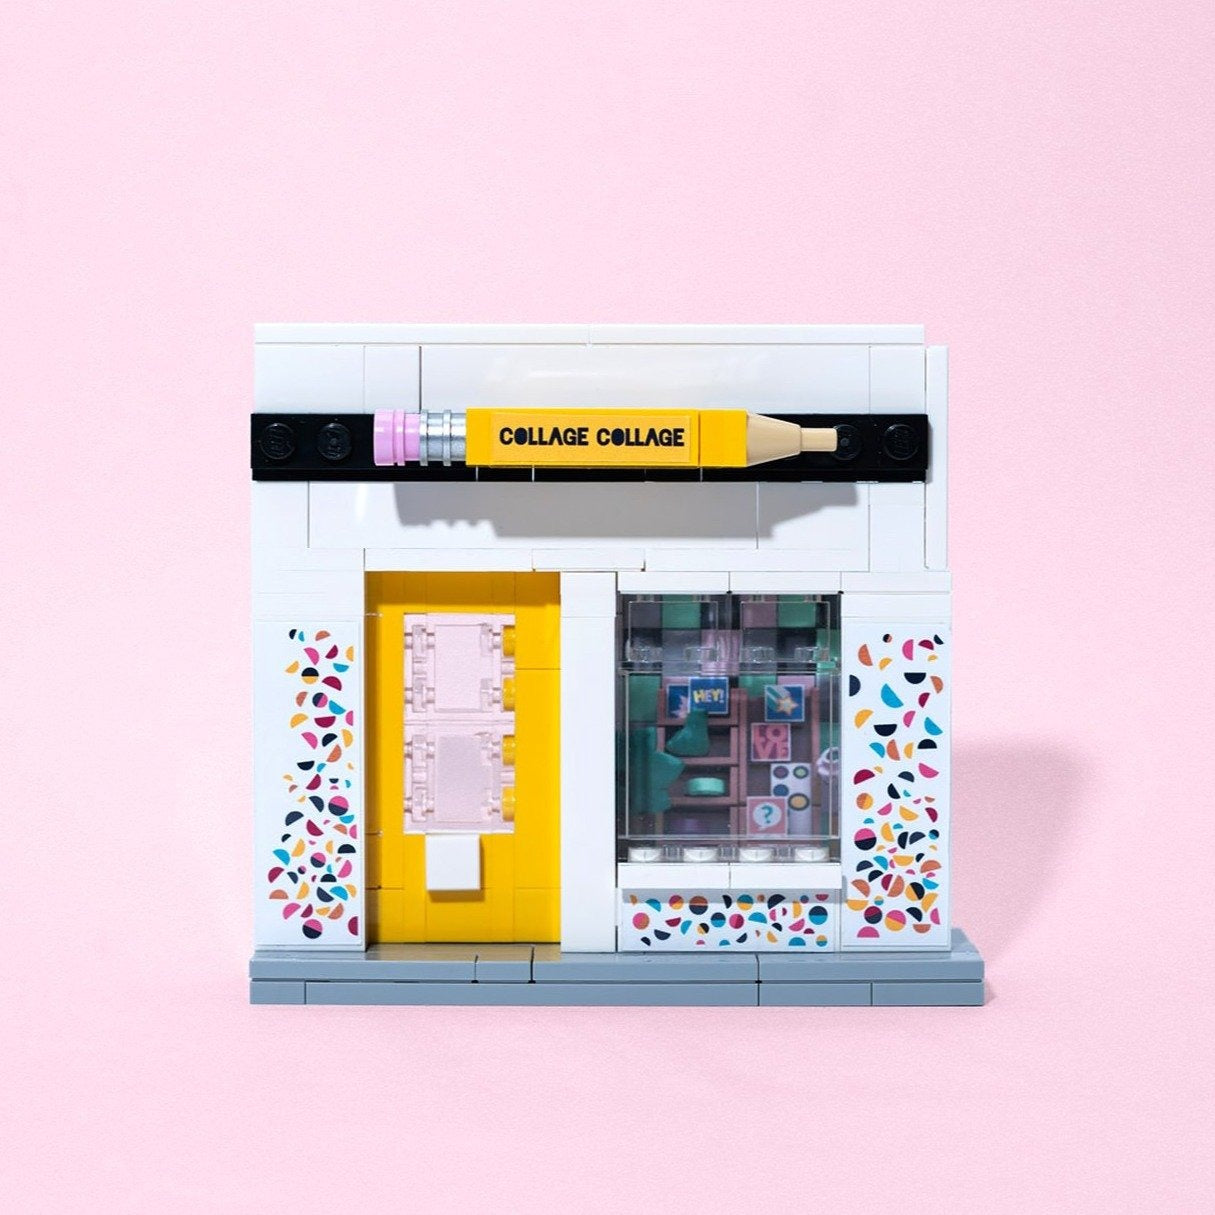 miniature replica of Collage Collage storefront built out of Lego Bricks